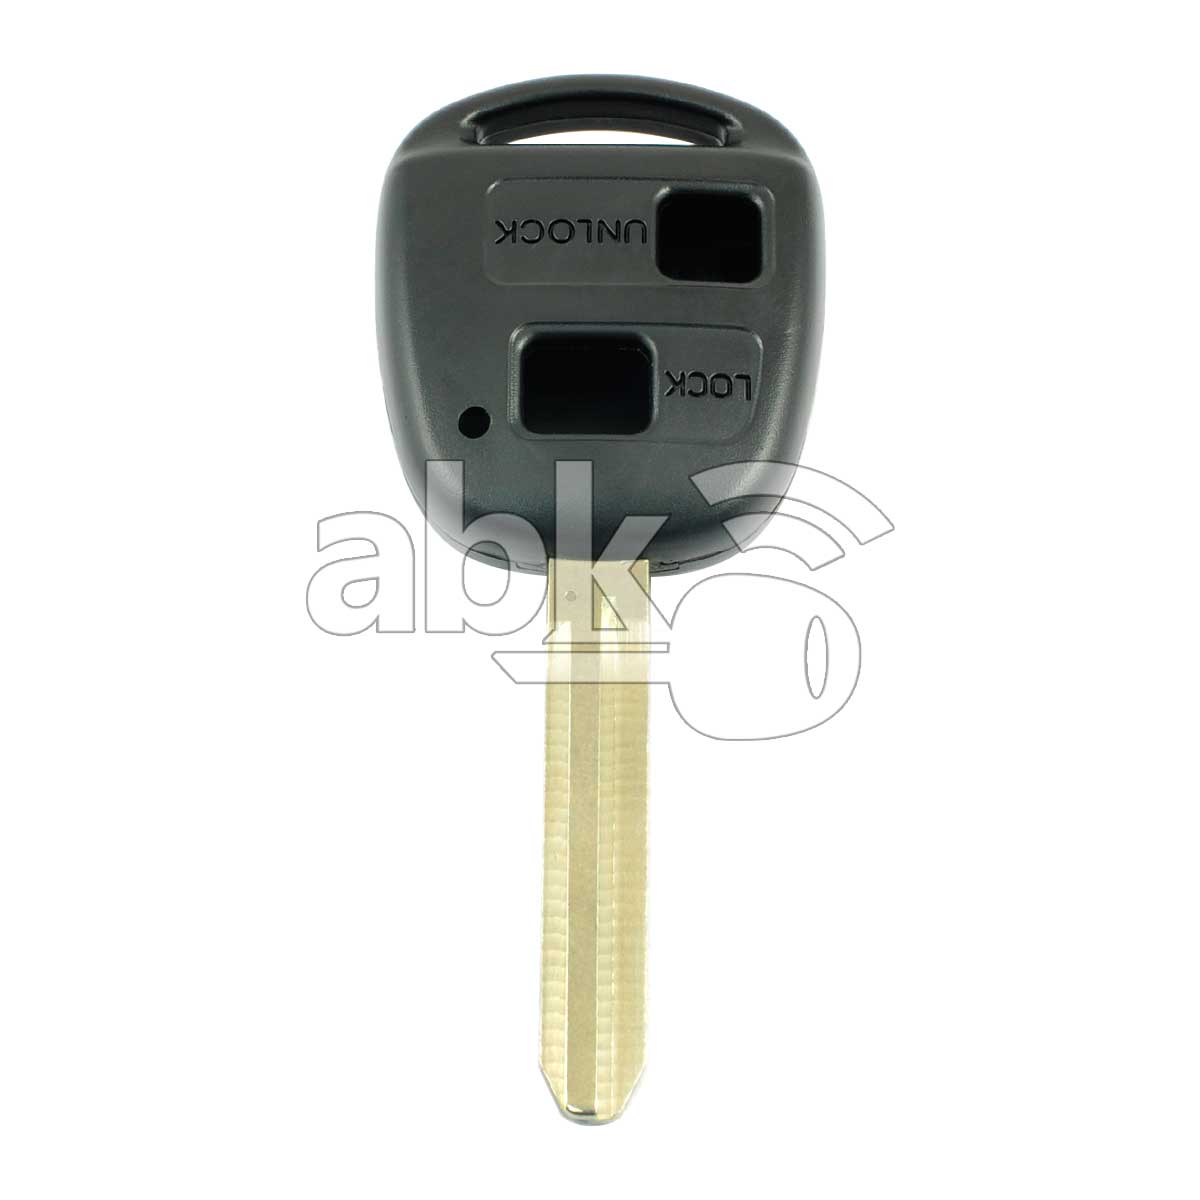 Toyota 1998+ Key Head Remote Cover 2Buttons TOY43 - ABK-179 - ABKEYS.COM